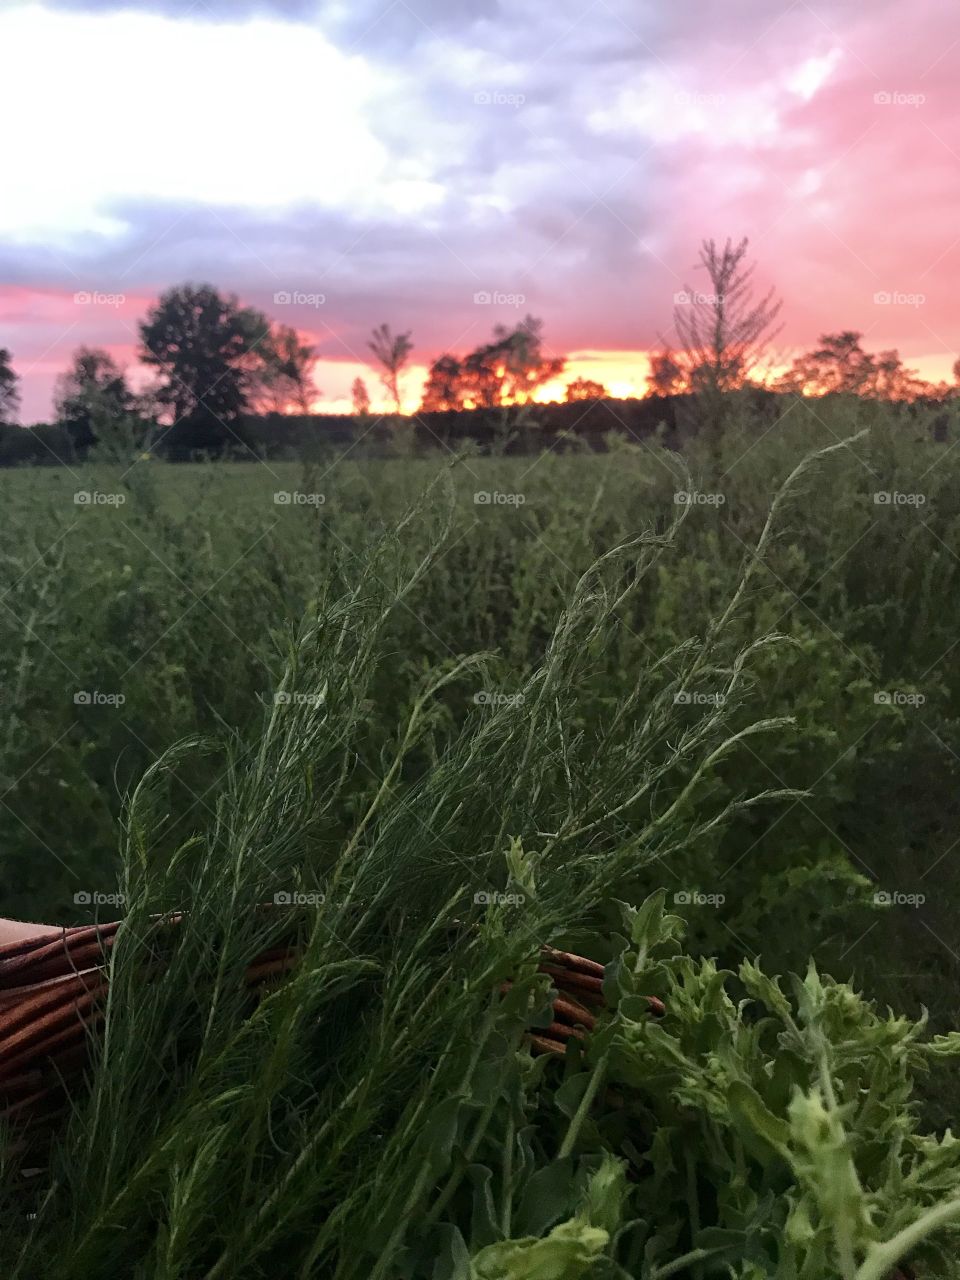 Gathering medicinal plants at sunset. In the cool of the evening is the second-best time to harvest plant materials to use for medicinal or culinary usage.